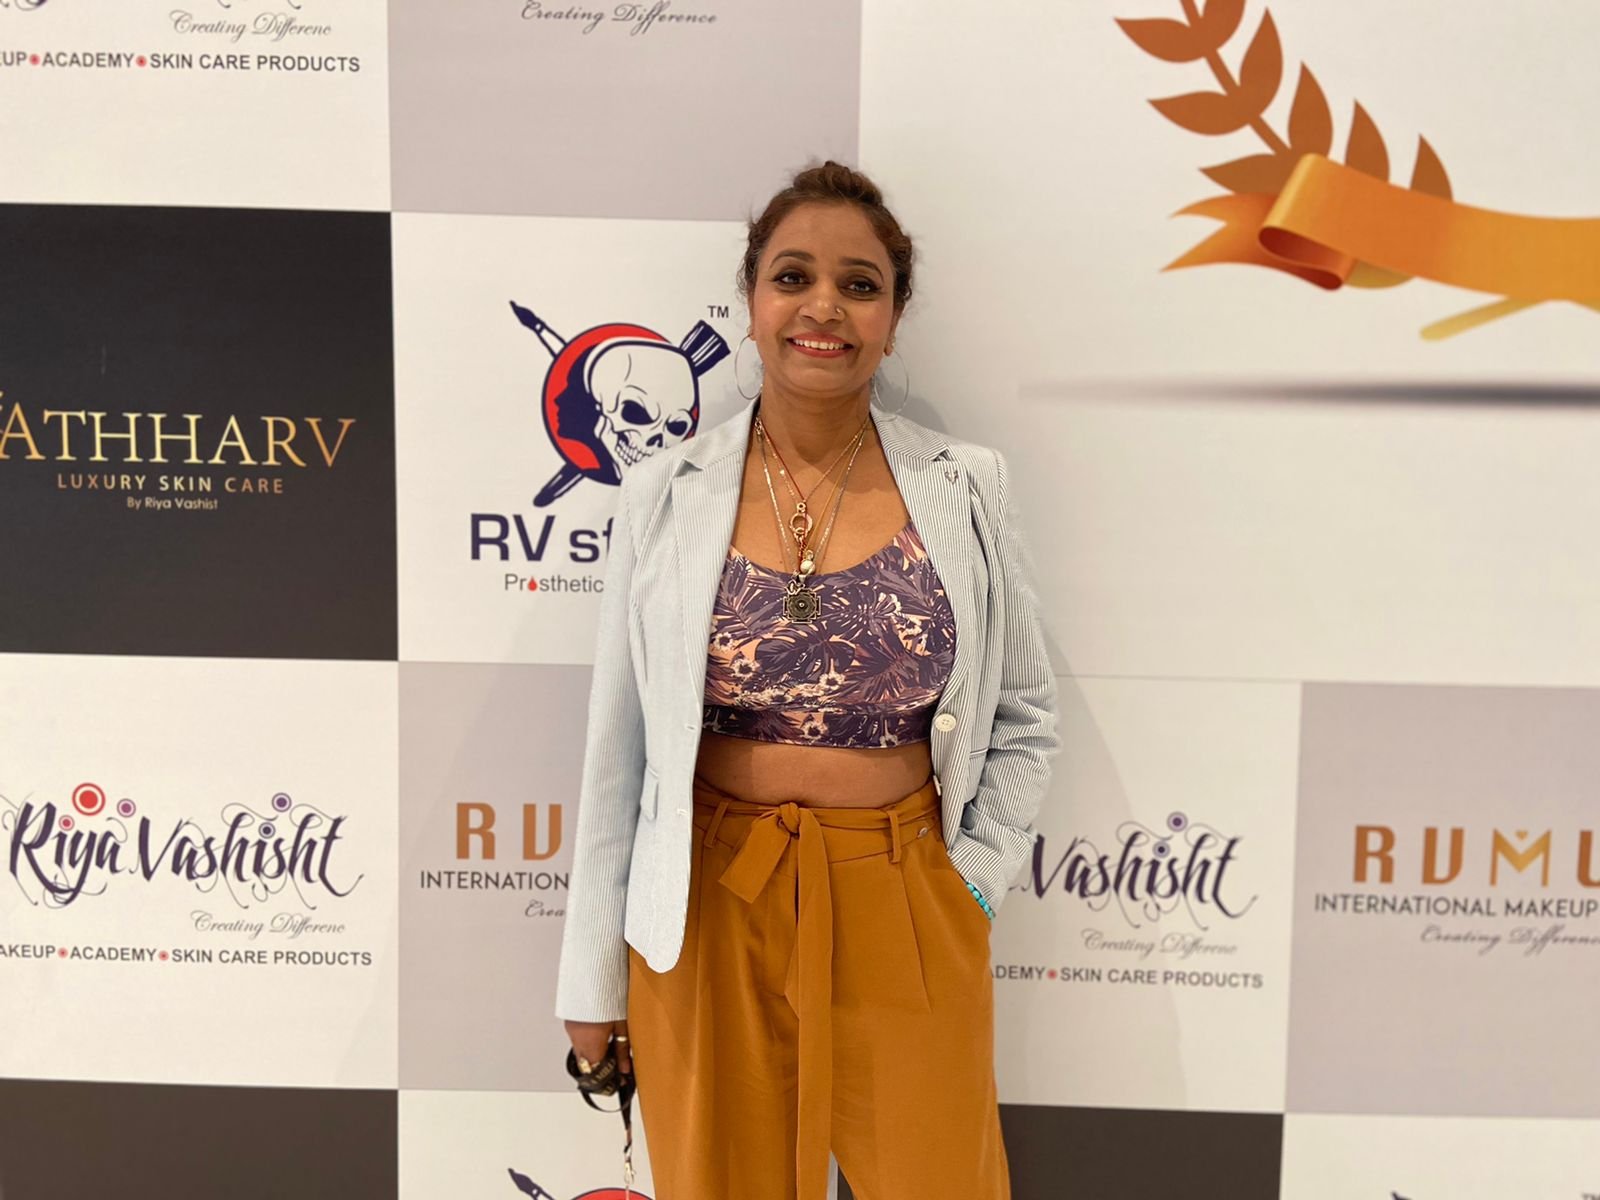 'RVMUA International Makeup Academy' was launched to share my knowledge and skills around beauty says the founder Riya Vashist